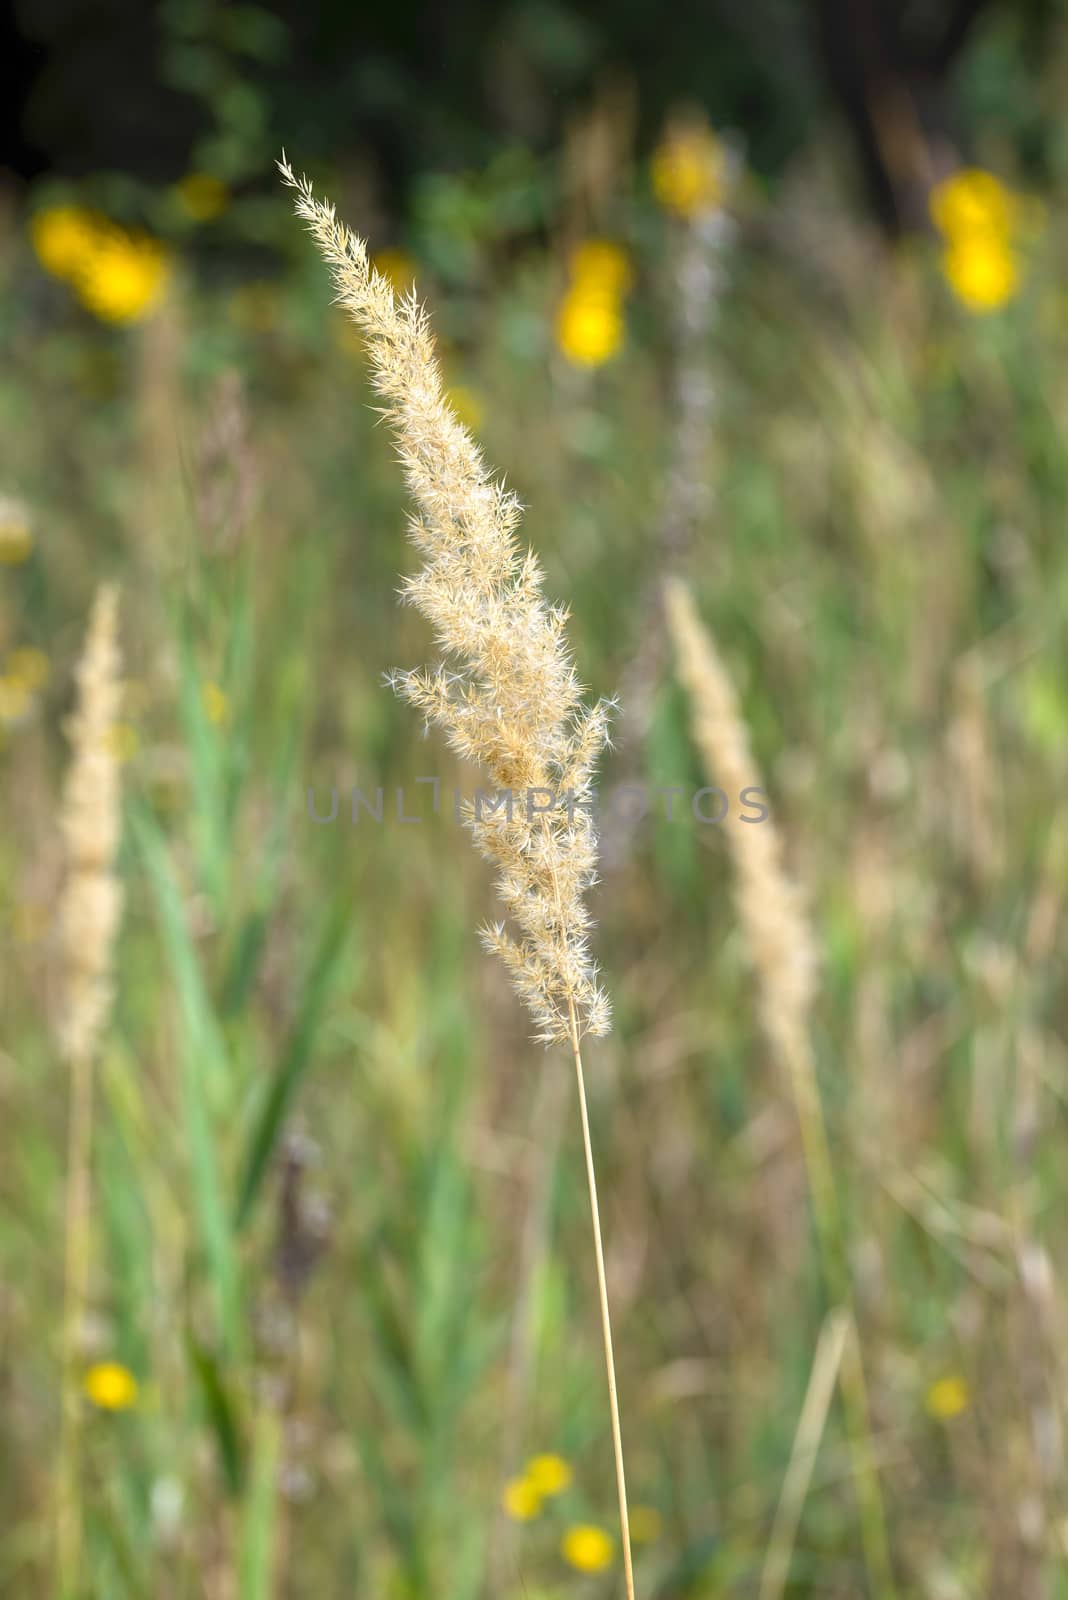 Calamagrostis Epigejos also called reed grass growind in the meadow